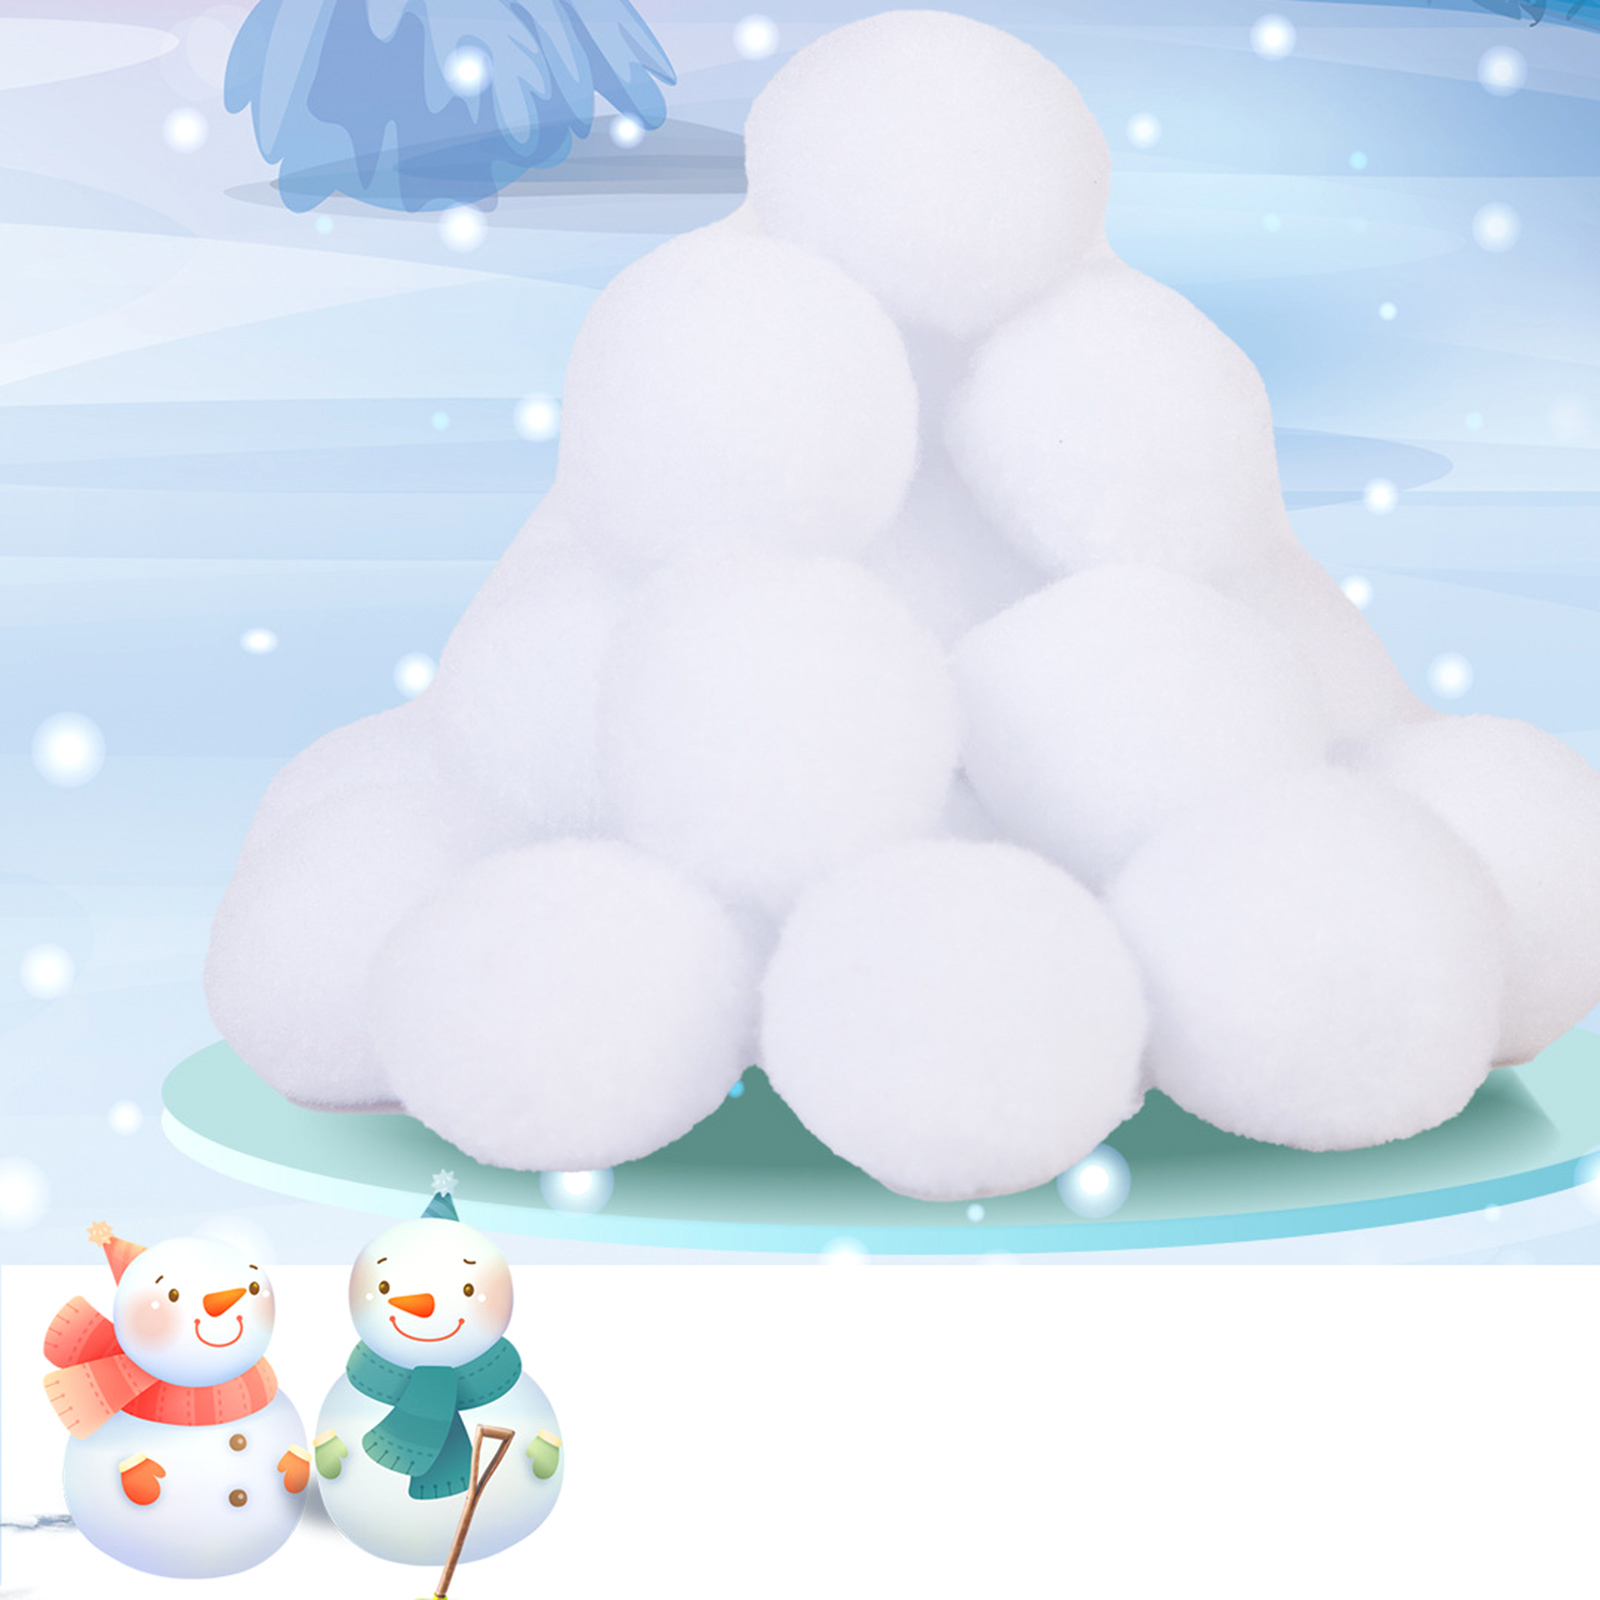 ZPAQI Set of 20/30/50 Snowball Fight Fake Snowballs Winter Xmas Decoration  Indoor Gift for Kids Christmas Fun Kids Educational 